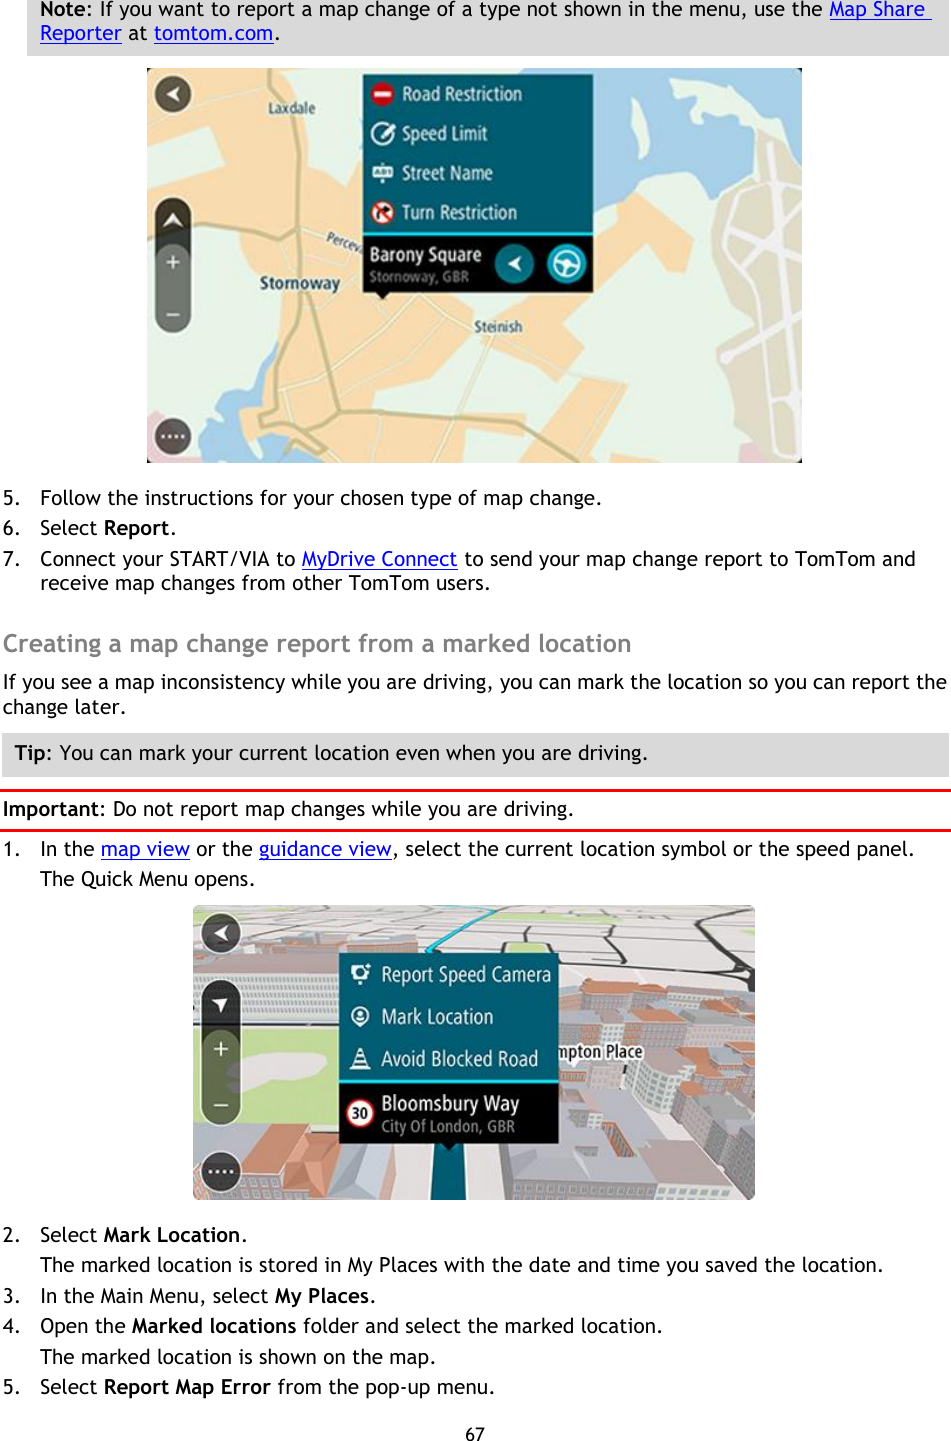 67    Note: If you want to report a map change of a type not shown in the menu, use the Map Share Reporter at tomtom.com.  5. Follow the instructions for your chosen type of map change. 6. Select Report. 7. Connect your START/VIA to MyDrive Connect to send your map change report to TomTom and receive map changes from other TomTom users.  Creating a map change report from a marked location If you see a map inconsistency while you are driving, you can mark the location so you can report the change later. Tip: You can mark your current location even when you are driving. Important: Do not report map changes while you are driving. 1. In the map view or the guidance view, select the current location symbol or the speed panel. The Quick Menu opens.  2. Select Mark Location. The marked location is stored in My Places with the date and time you saved the location. 3. In the Main Menu, select My Places. 4. Open the Marked locations folder and select the marked location. The marked location is shown on the map. 5. Select Report Map Error from the pop-up menu. 